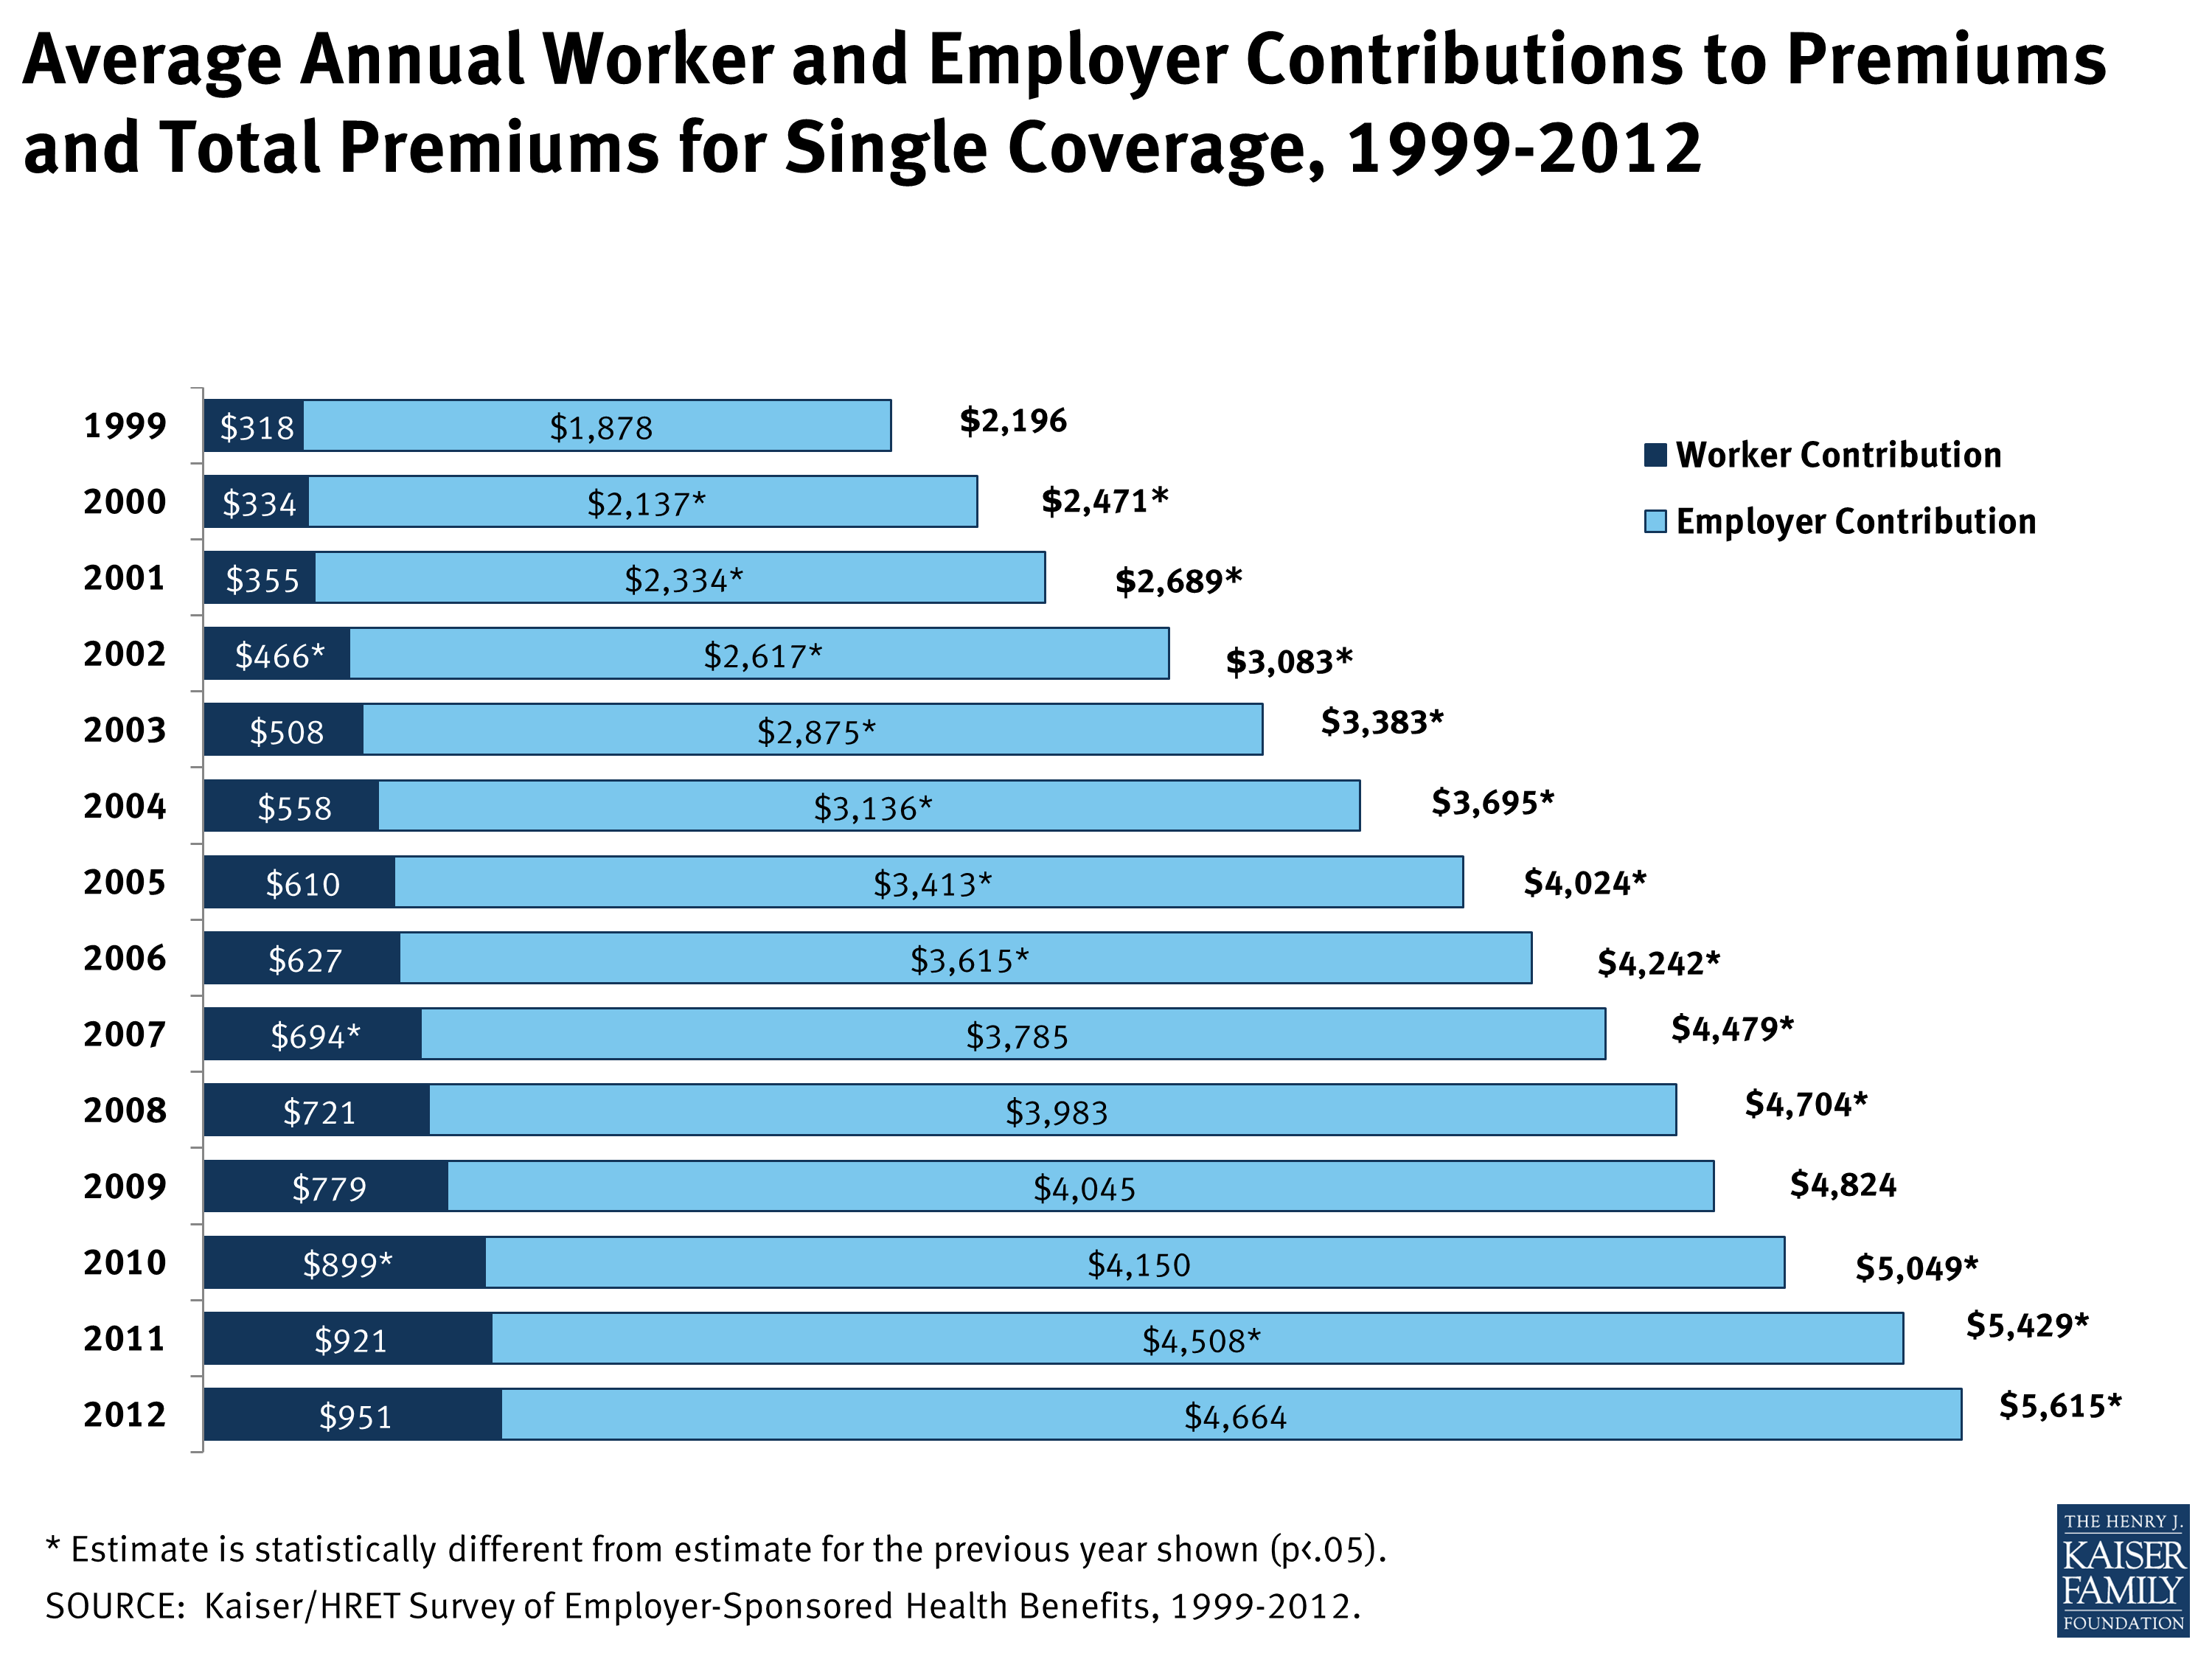 Average Annual Worker and Employer Contributions to Premiums and Total